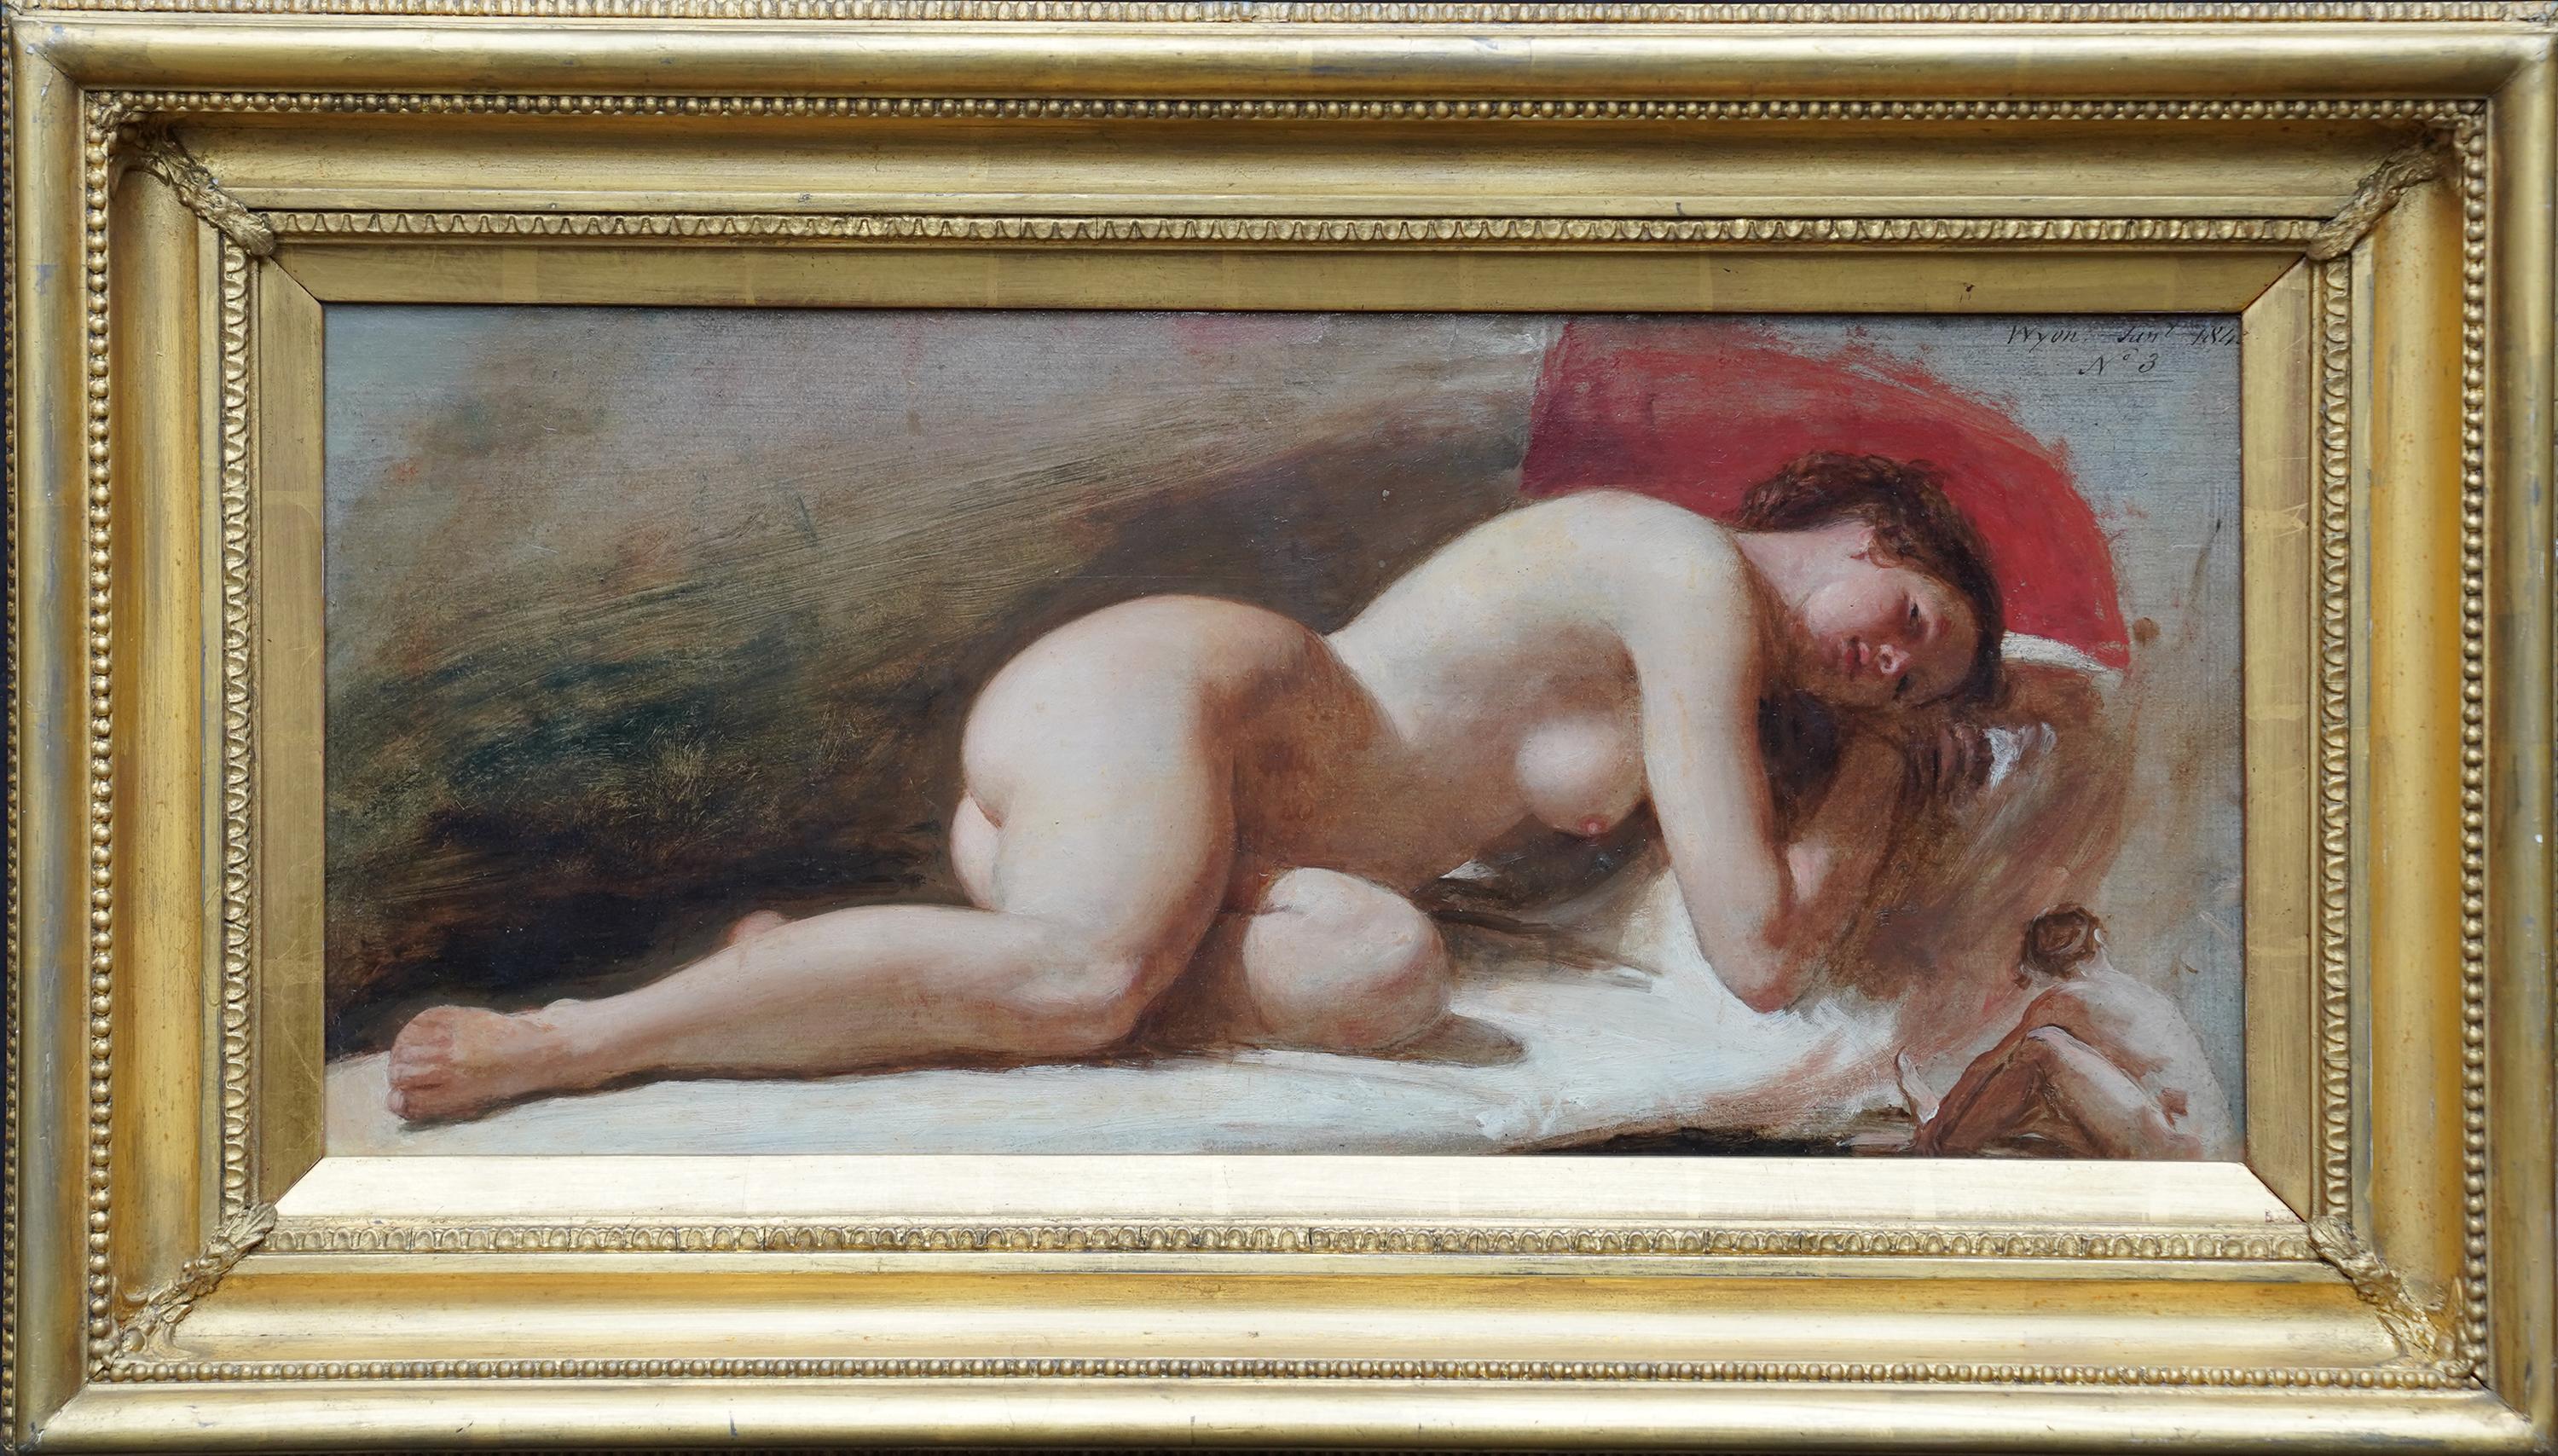 Edward William Wyon Nude Painting - Reclining Nude Female Portrait - British 19th century Victorian art oil painting